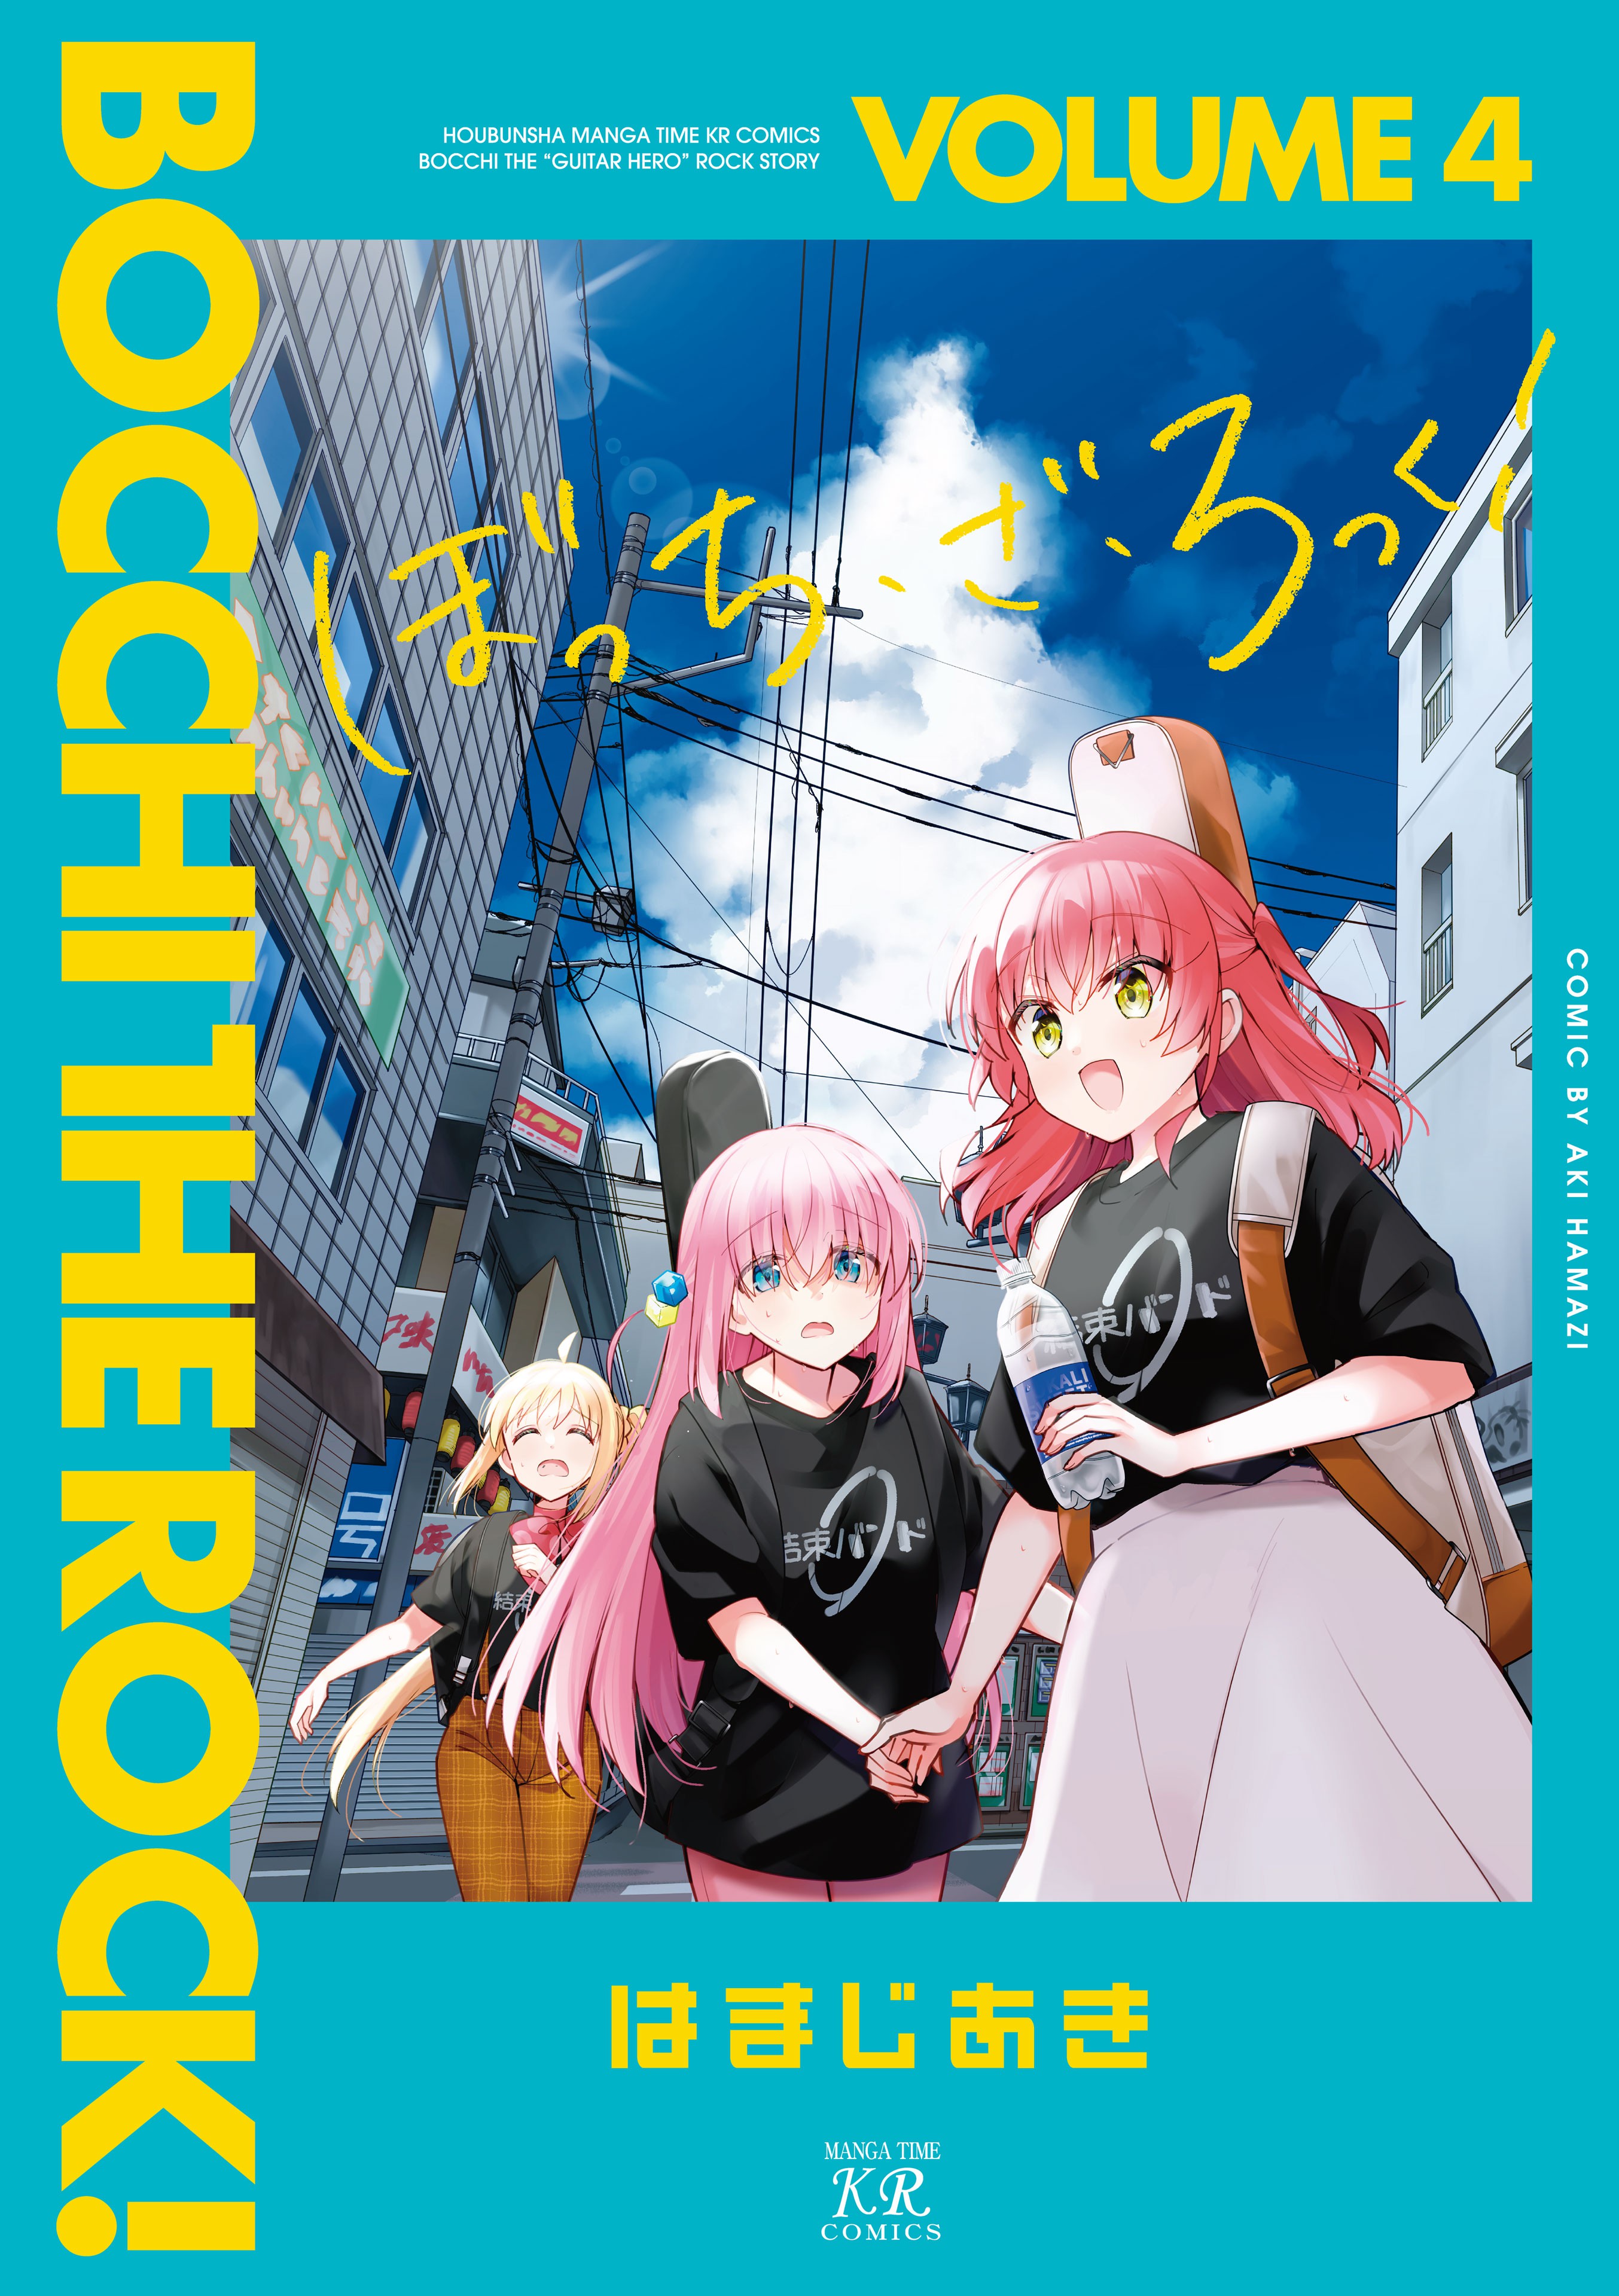 Bocchi the rock chapter 1